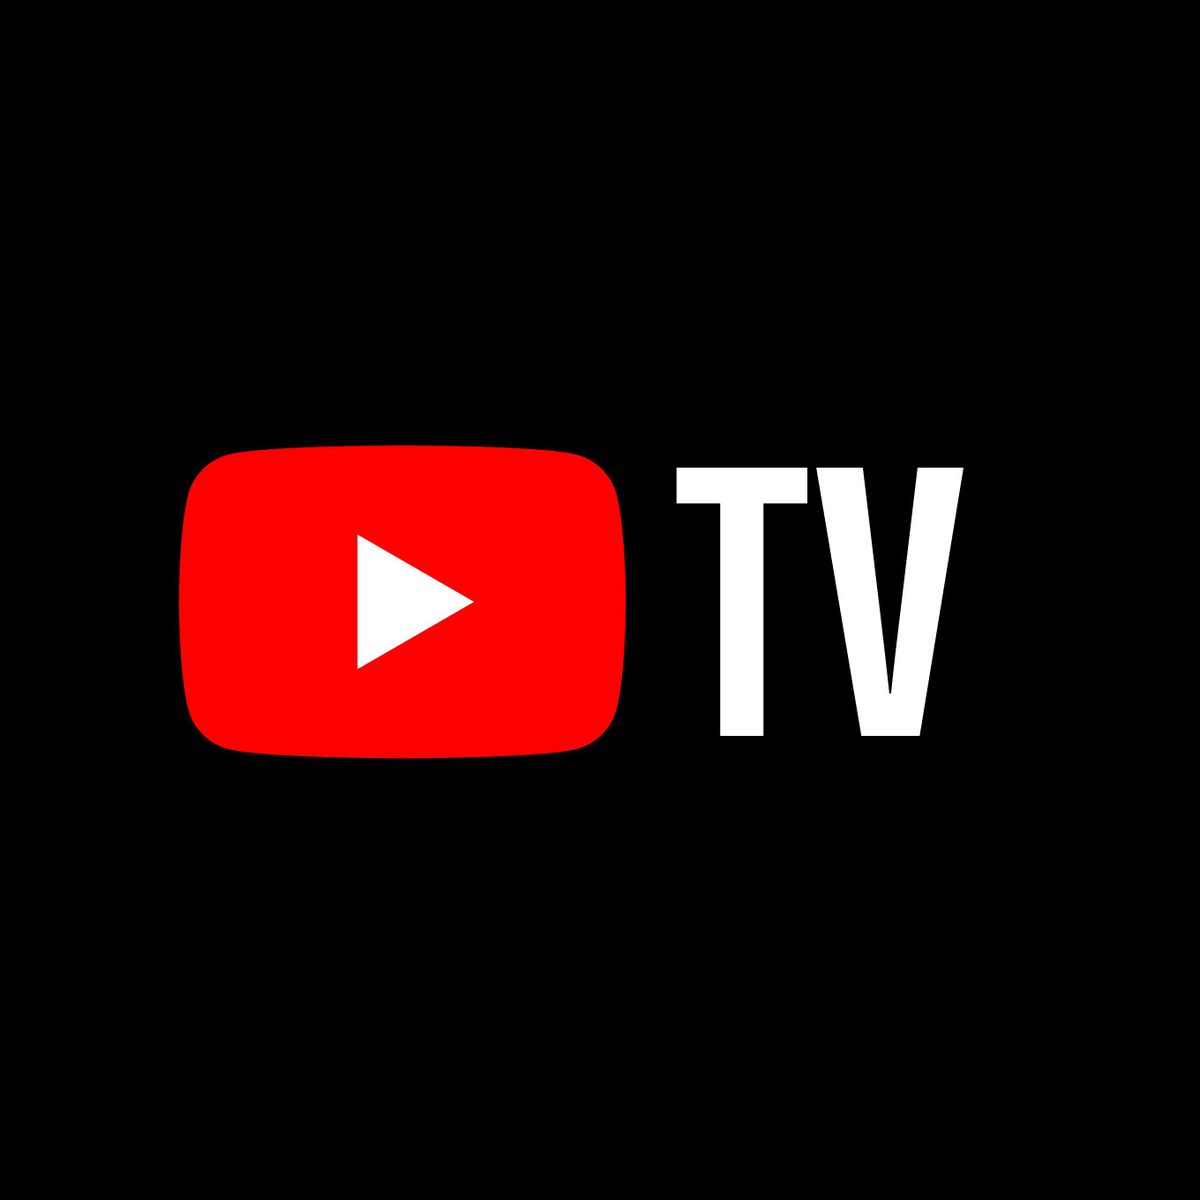 Image showing the YouTube TV logo on a black background.